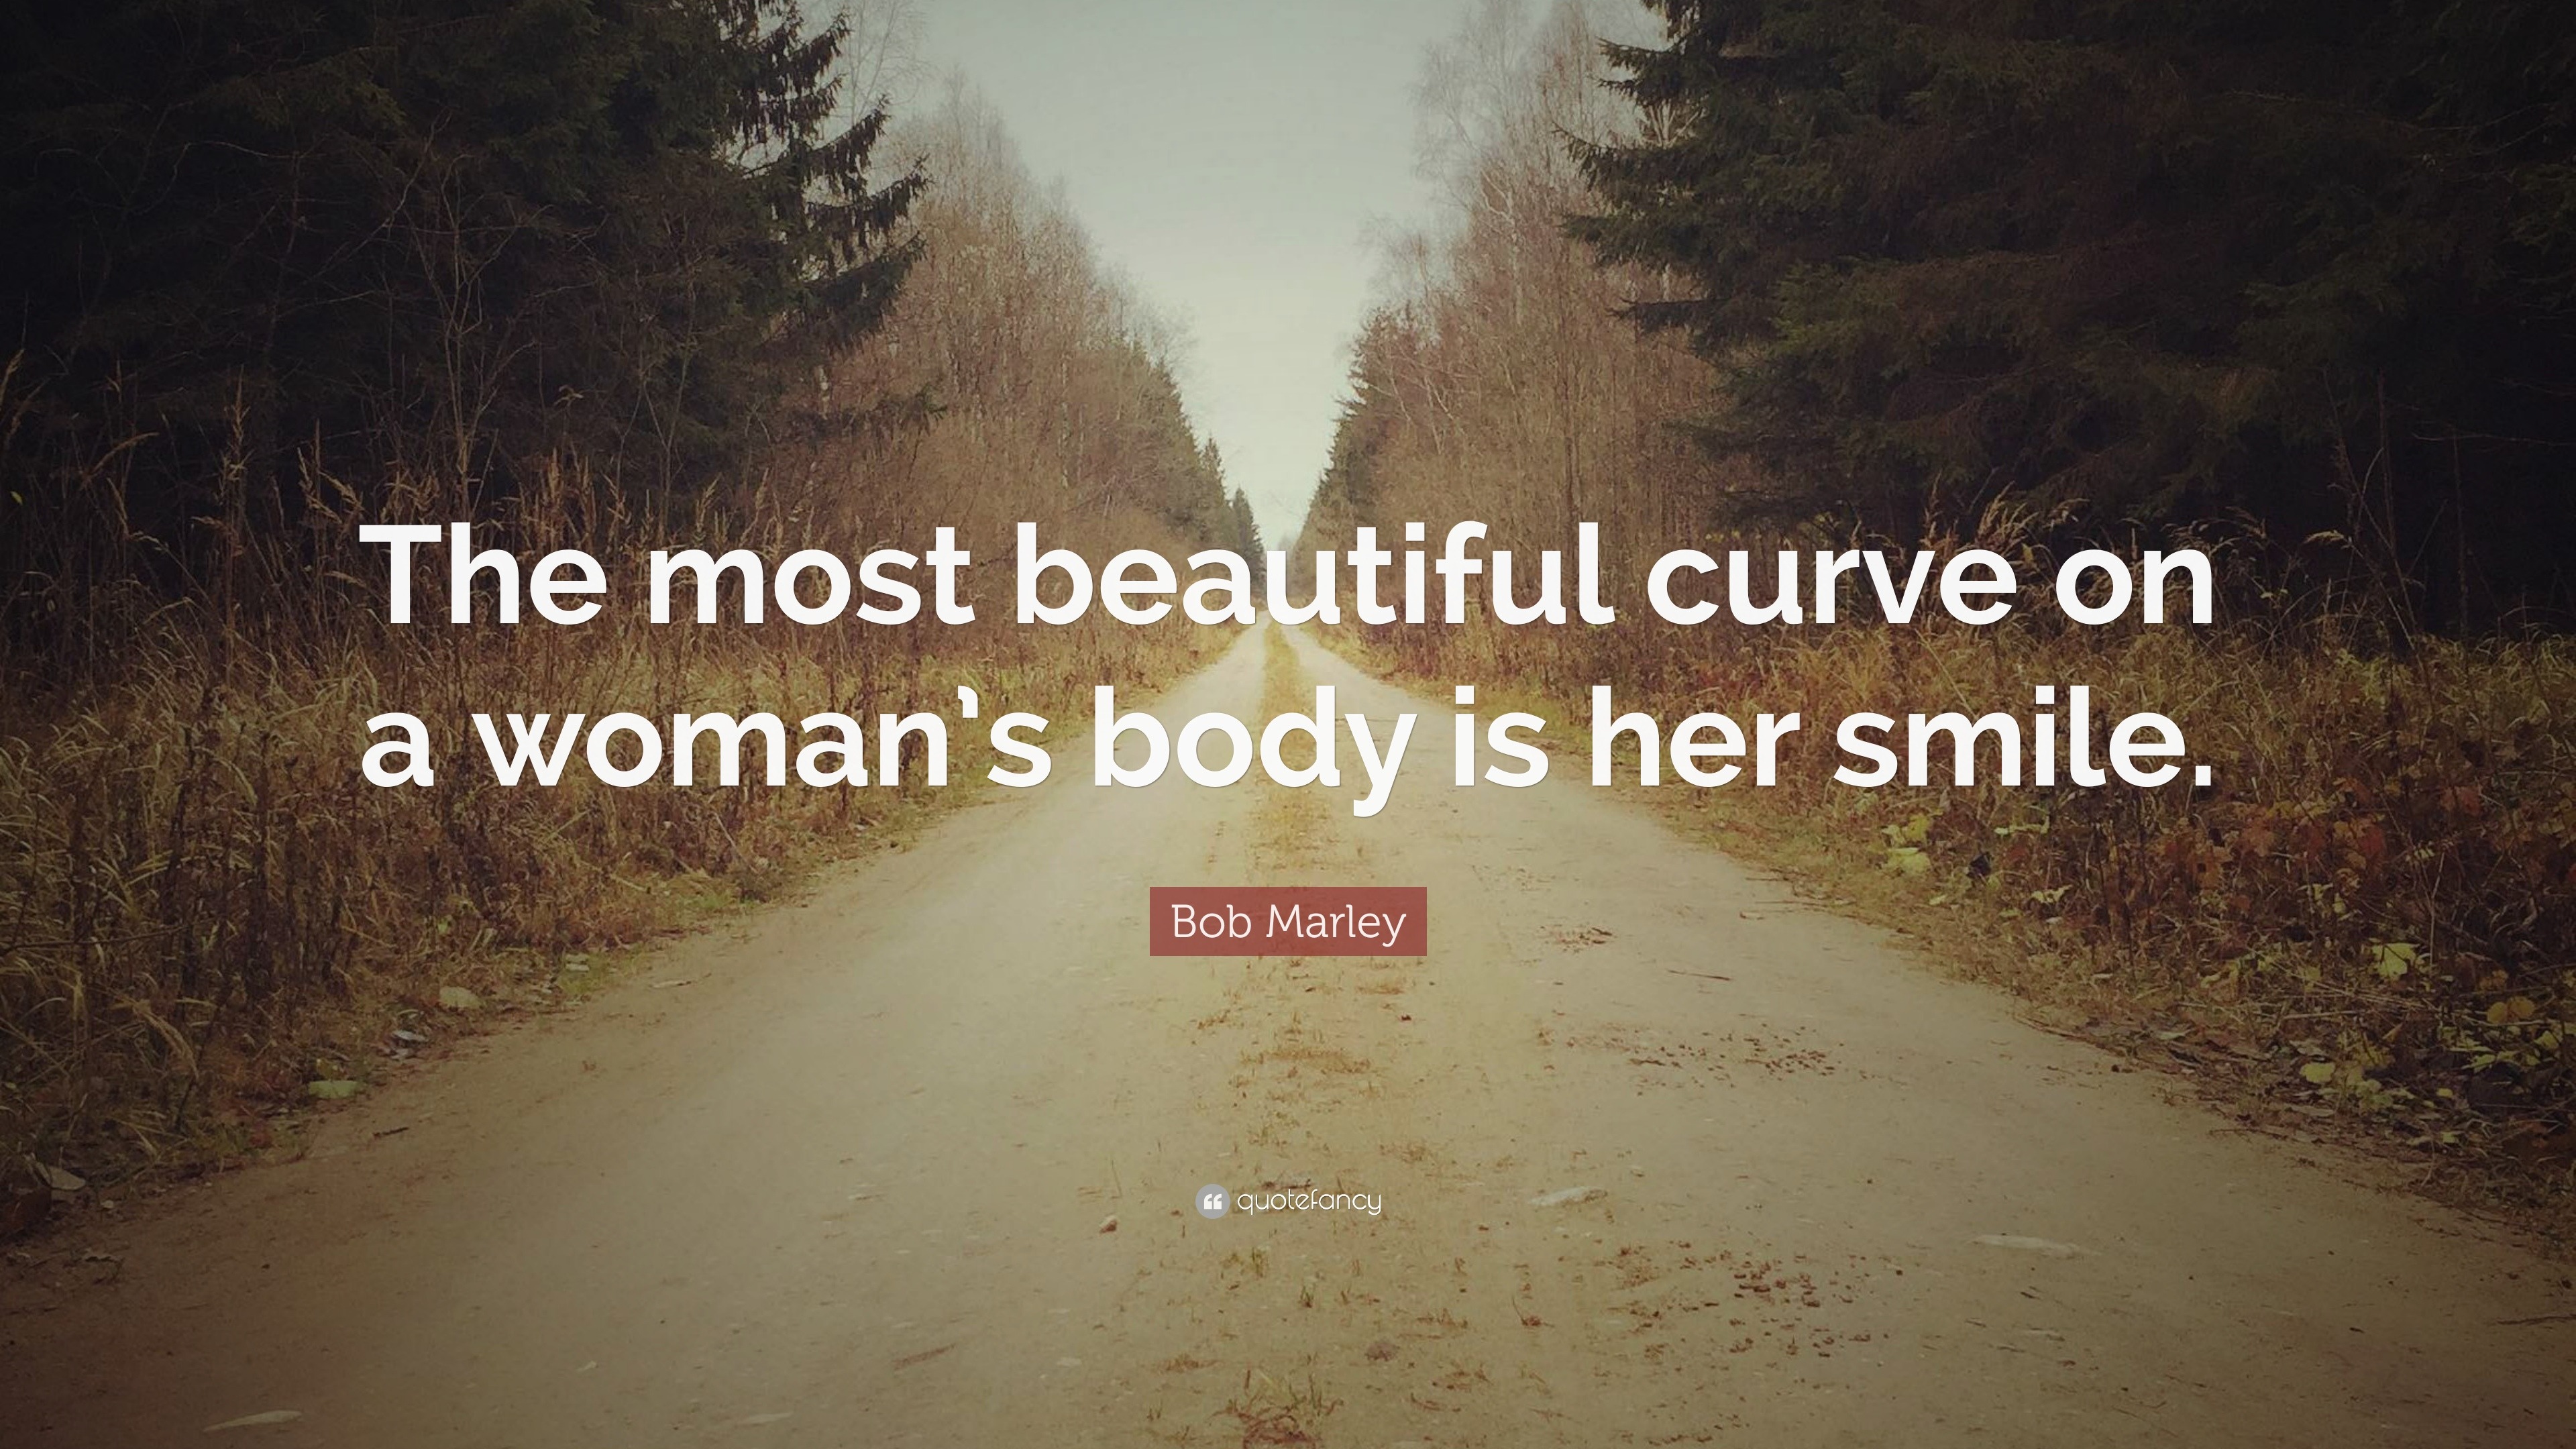 Bob Marley Quote: “The most beautiful curve on a woman's body is